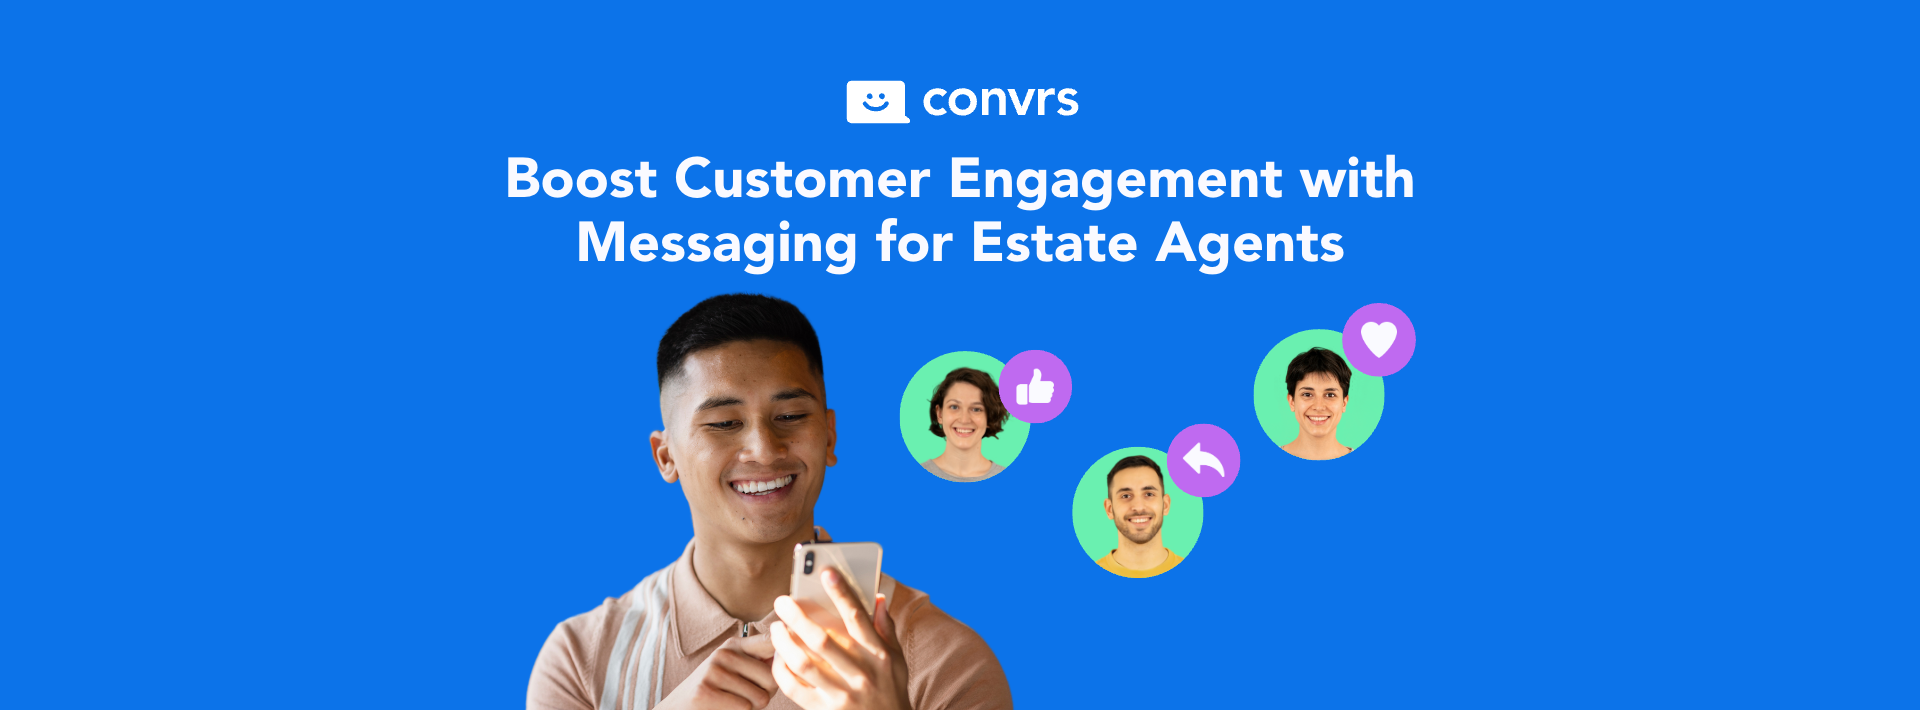 Estate Agent using messaging to connect with customers